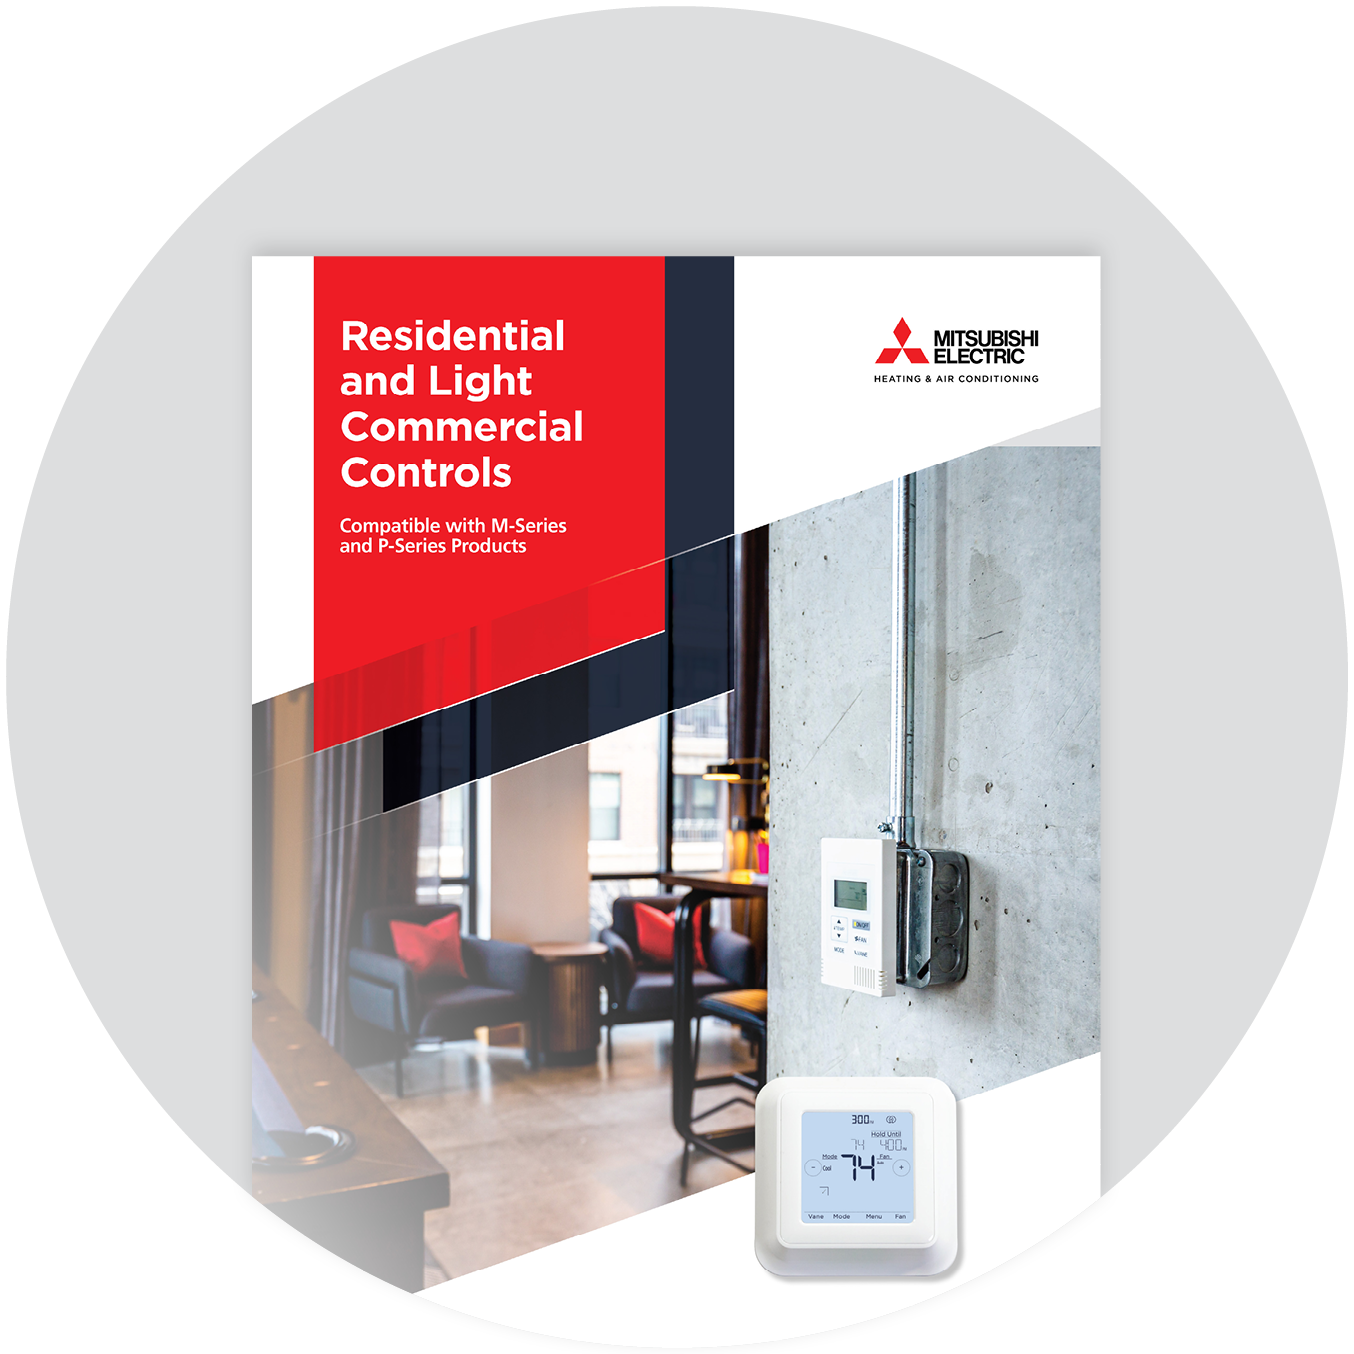 Residential and Light Commercial Controls